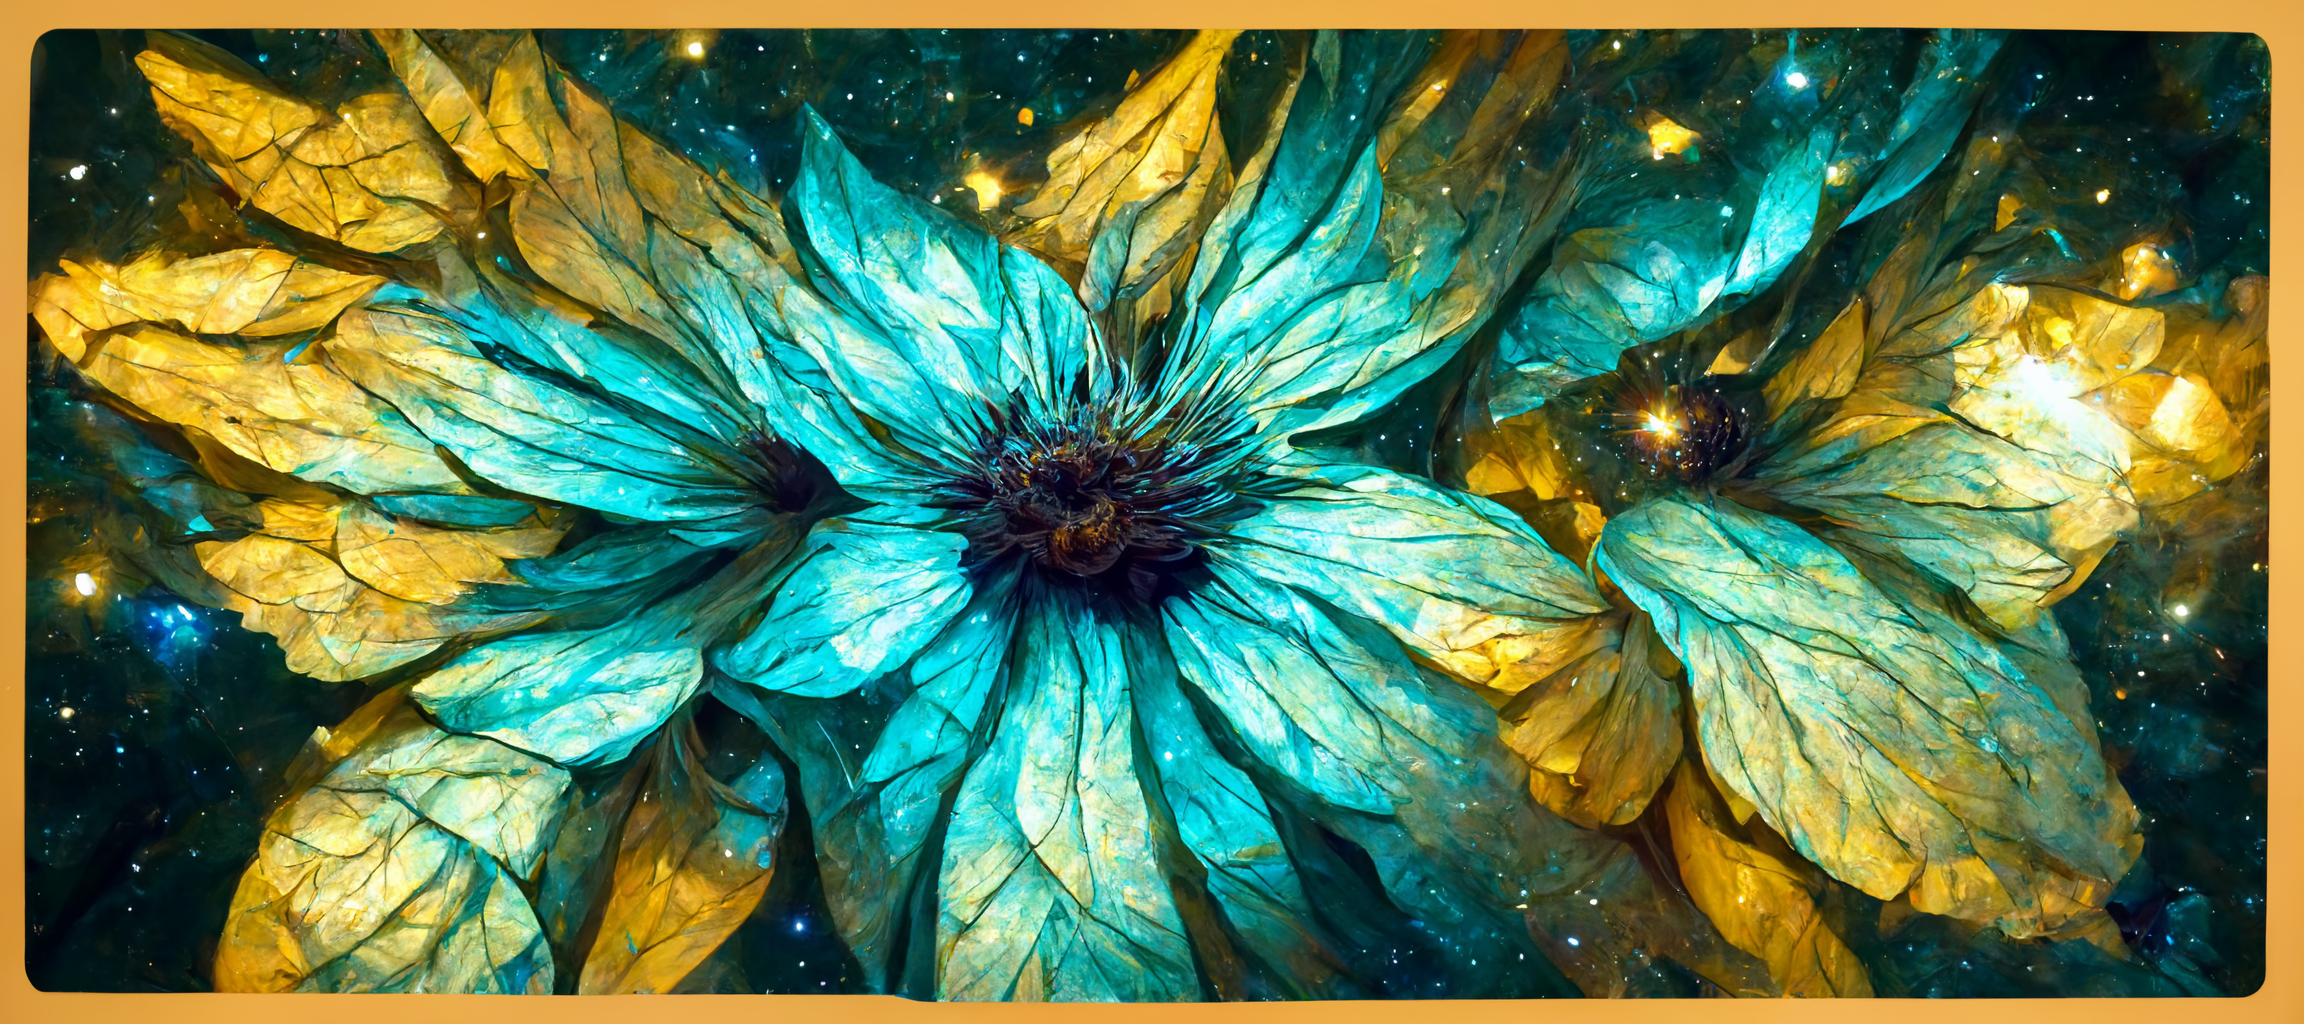 General 2304x1024 flowers abstract plants AI art